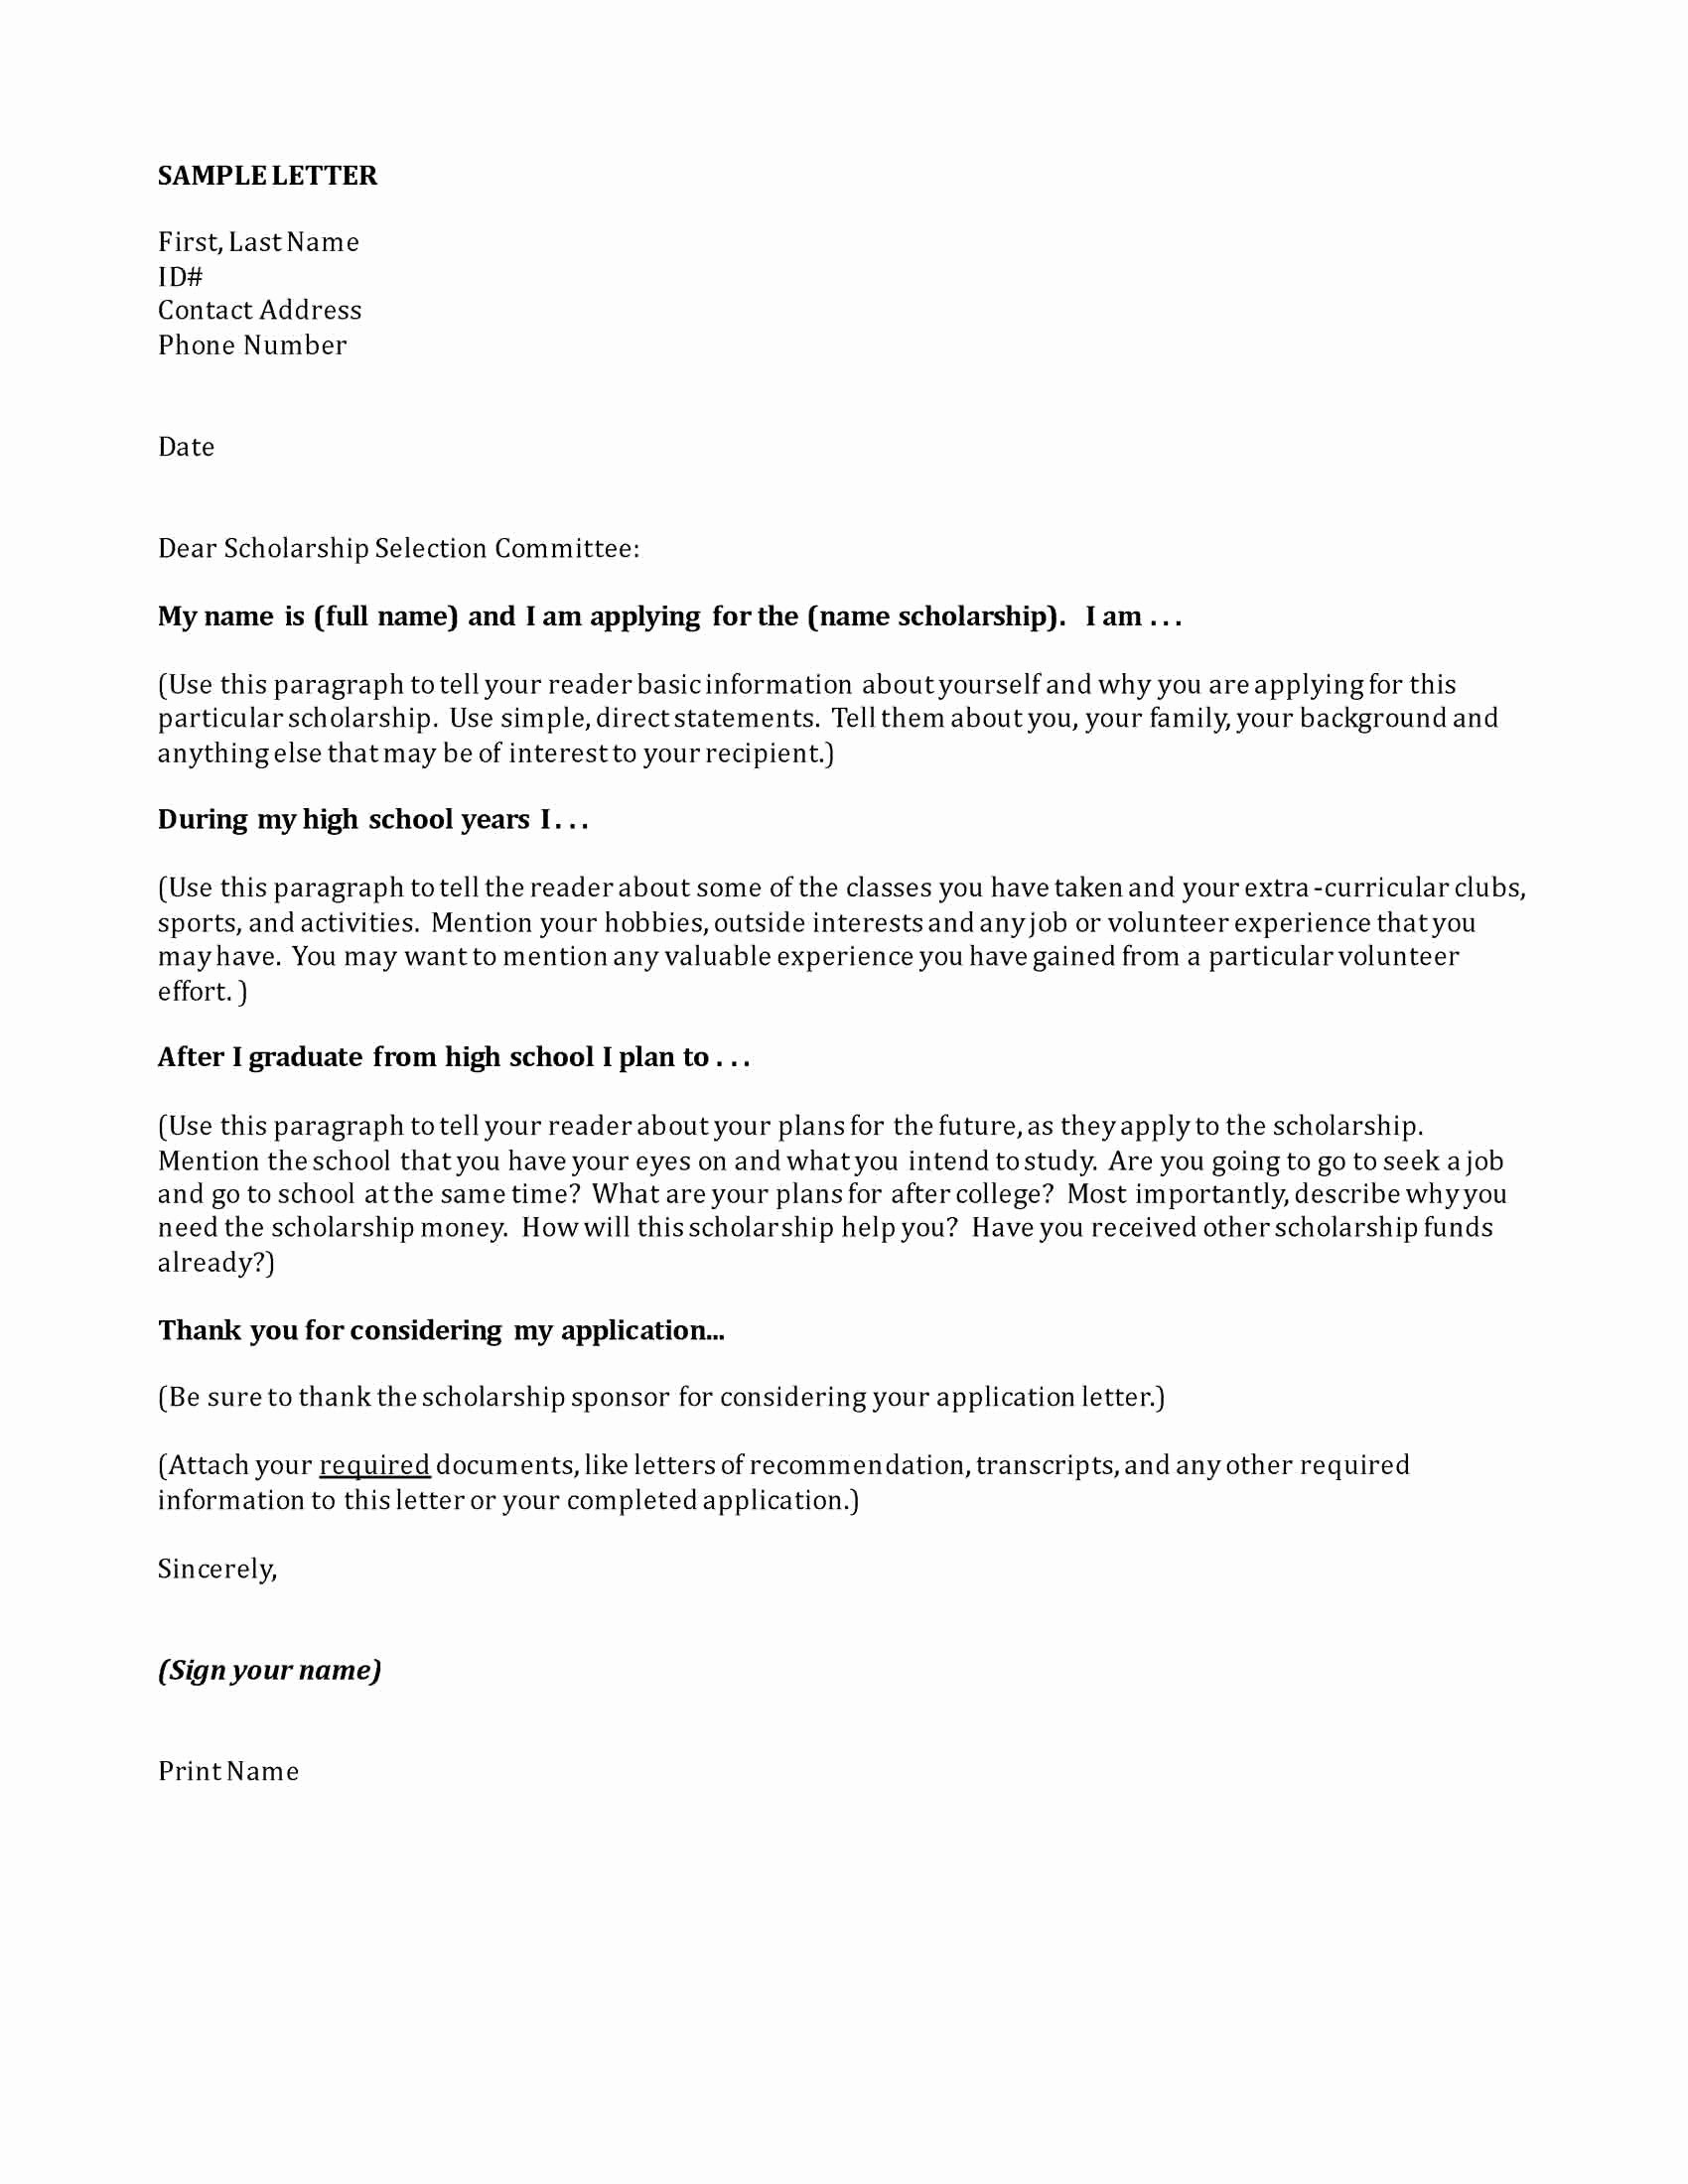 Scholarship Cover Letter Sample Beautiful Letter Application Letter Application Sample